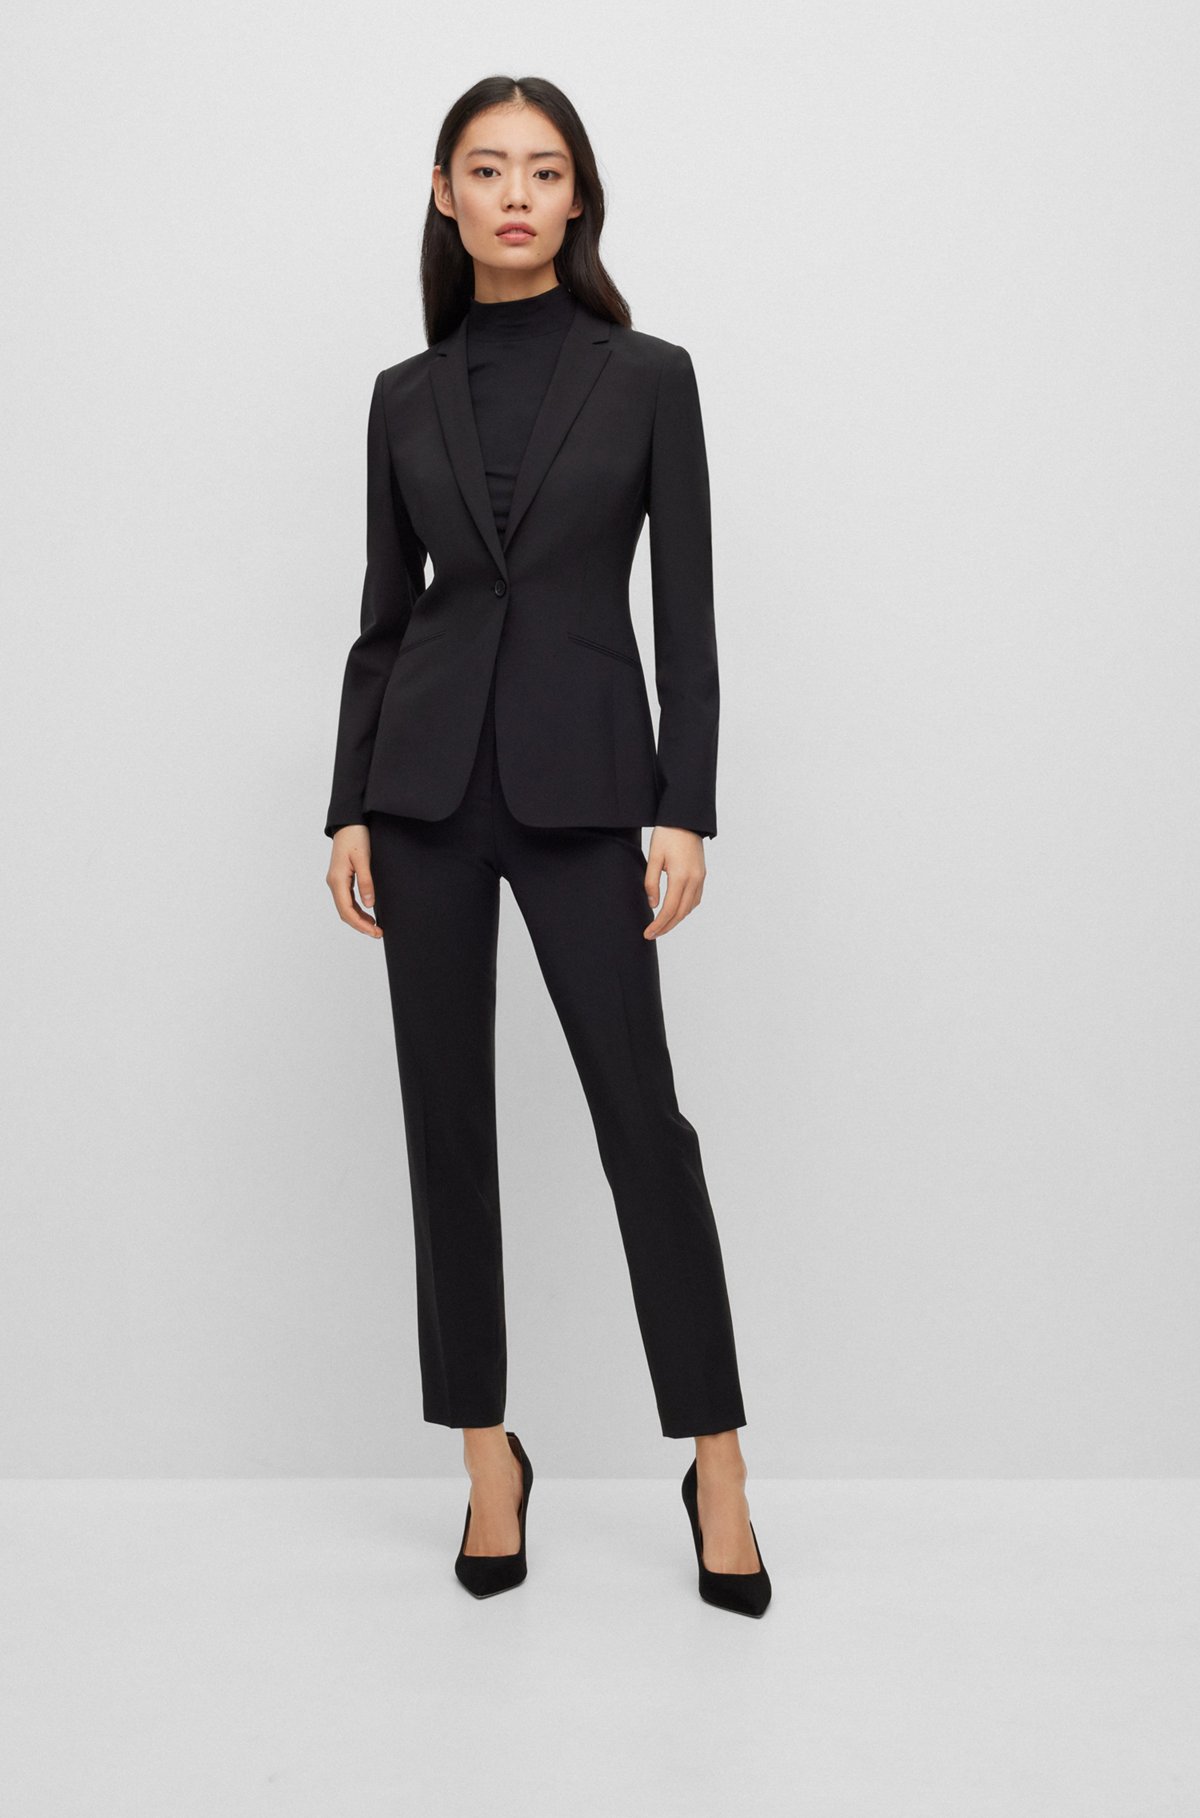 BOSS - Regular-fit jacket in stretch wool with curved lapels